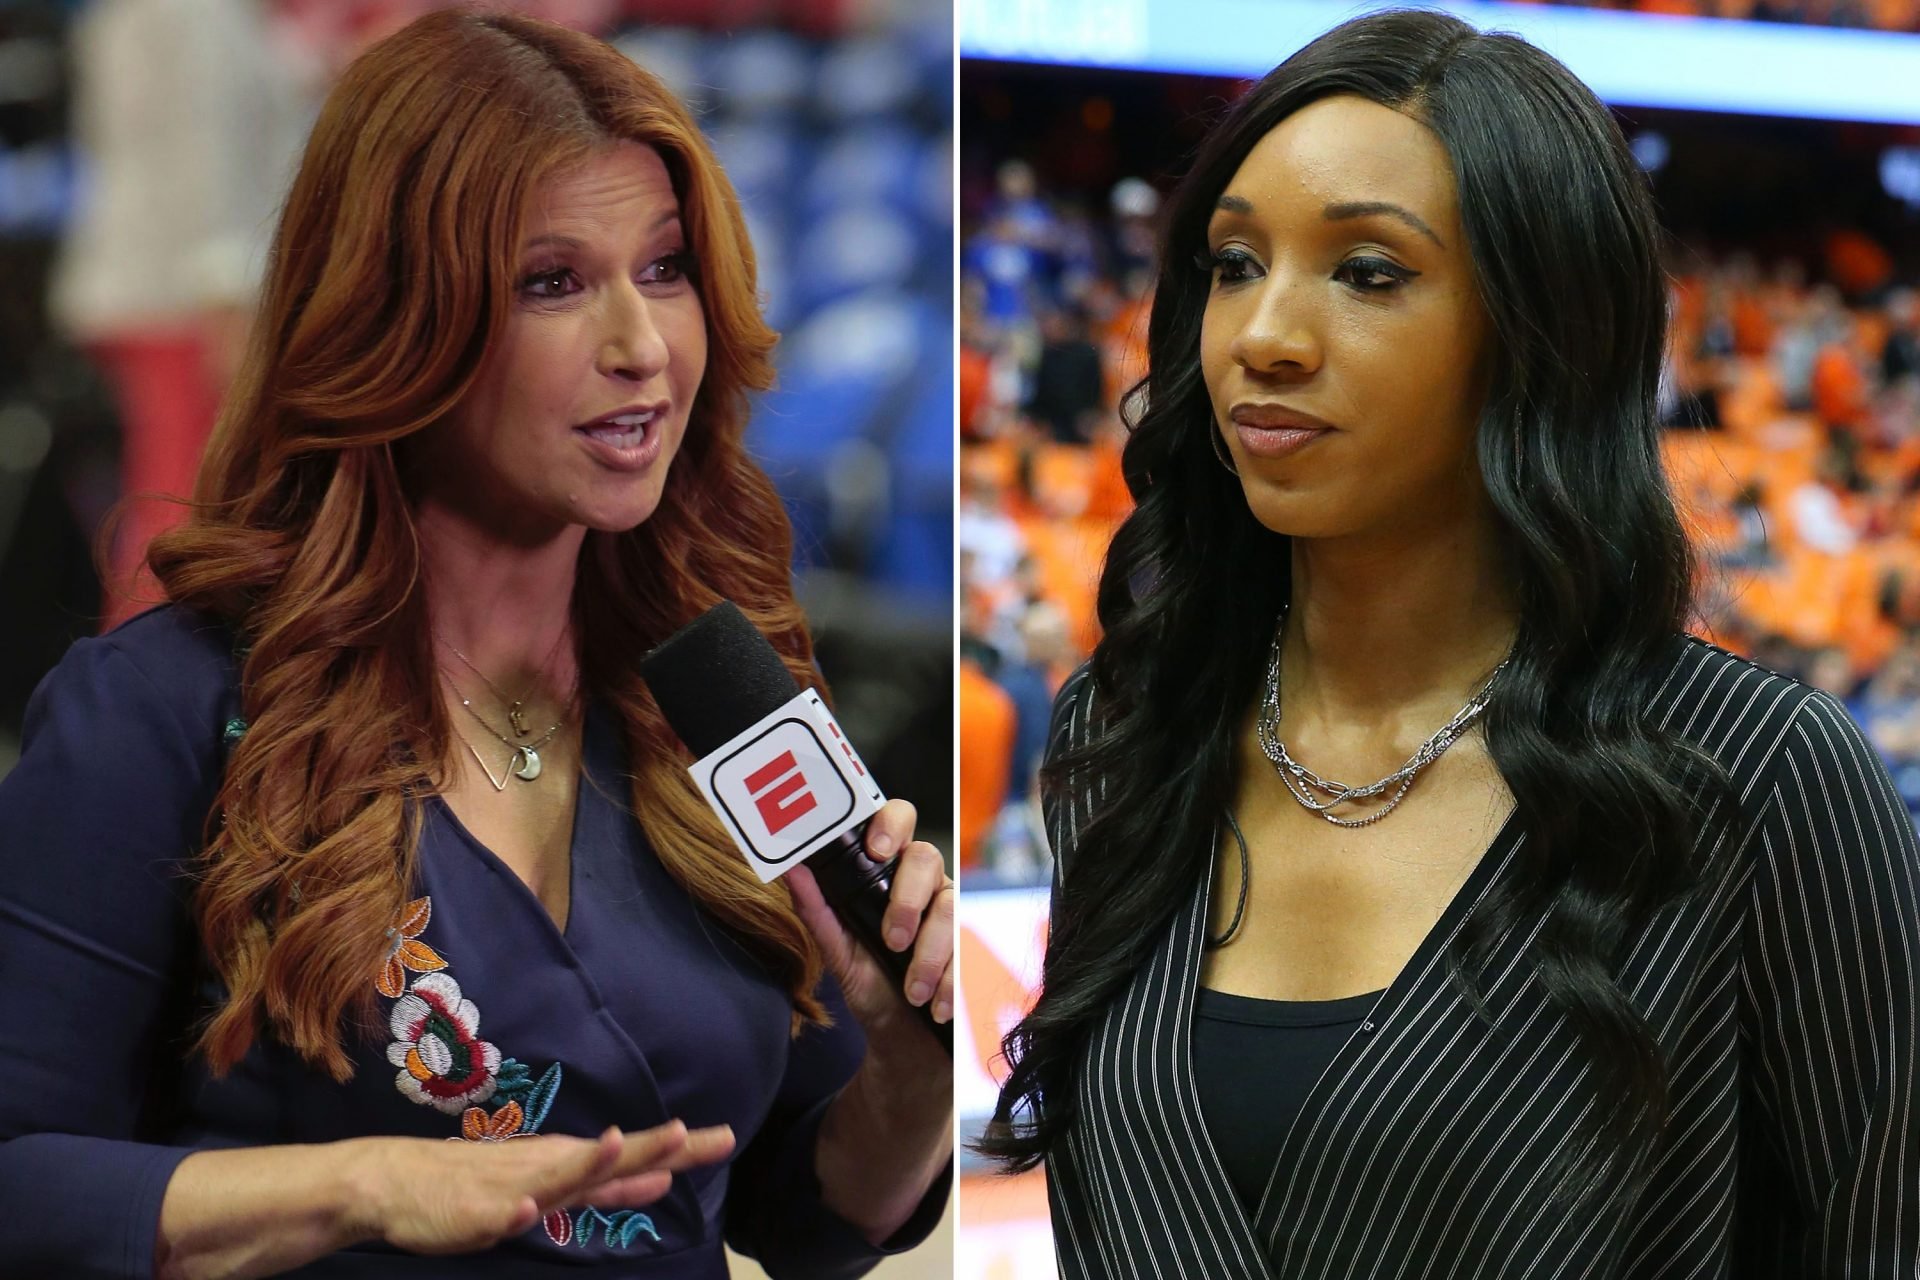 Twitter reacts to leaked audio revealing fallout between ESPN hosts Rachel Nichols and Maria Taylor